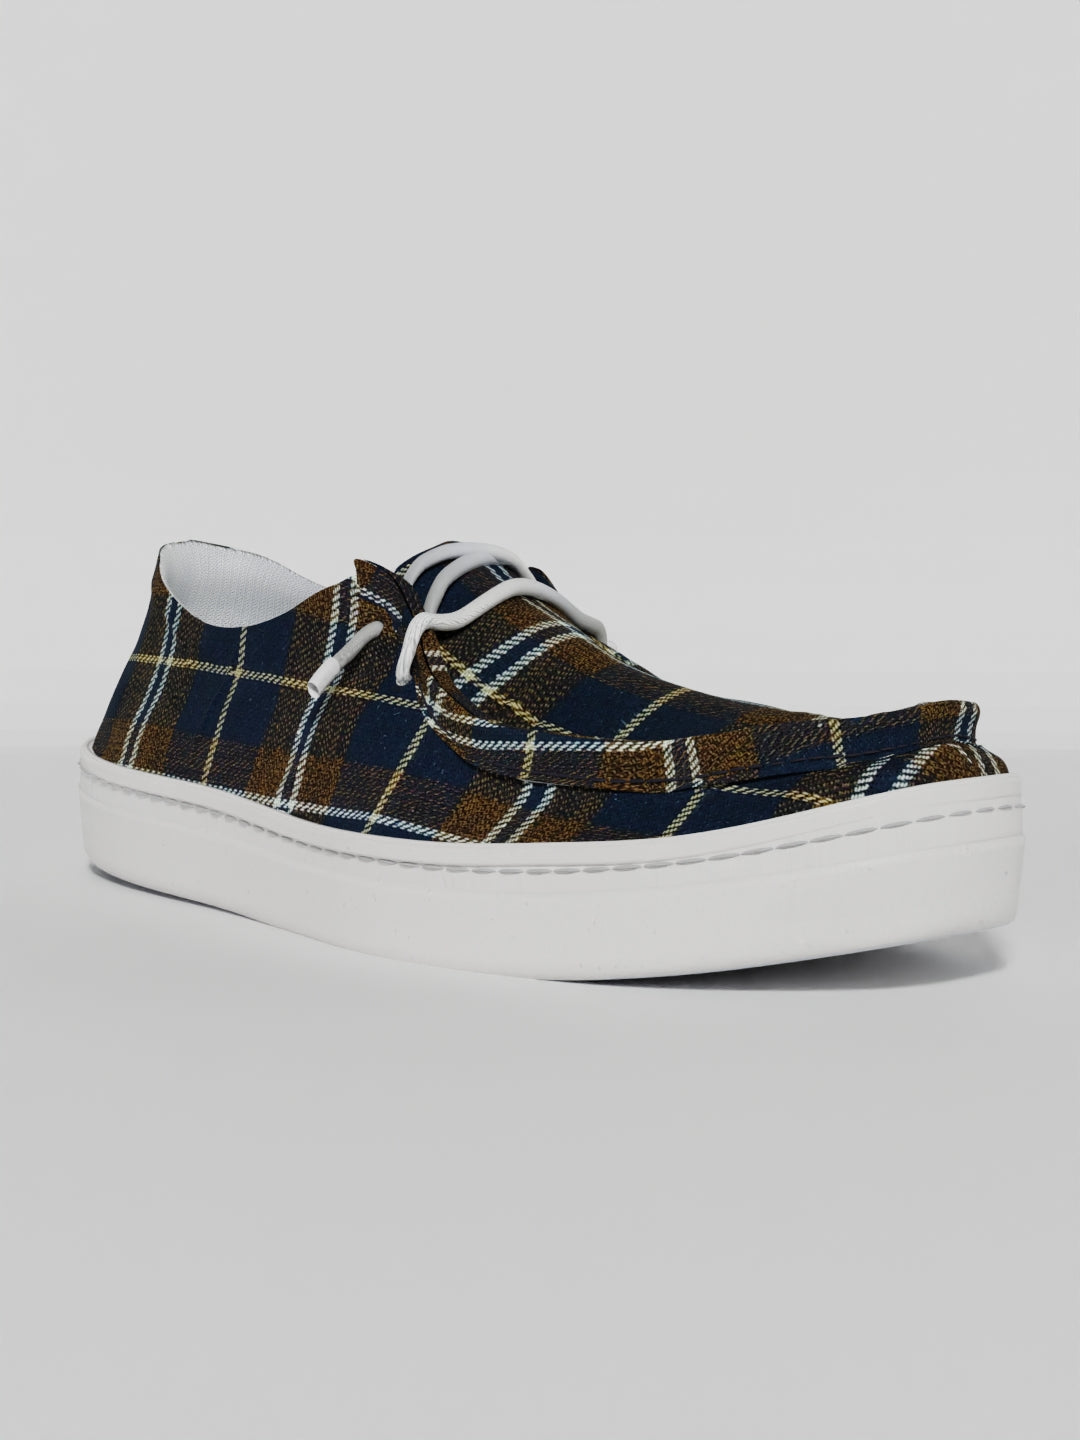 The Luna Navy and Brown Check